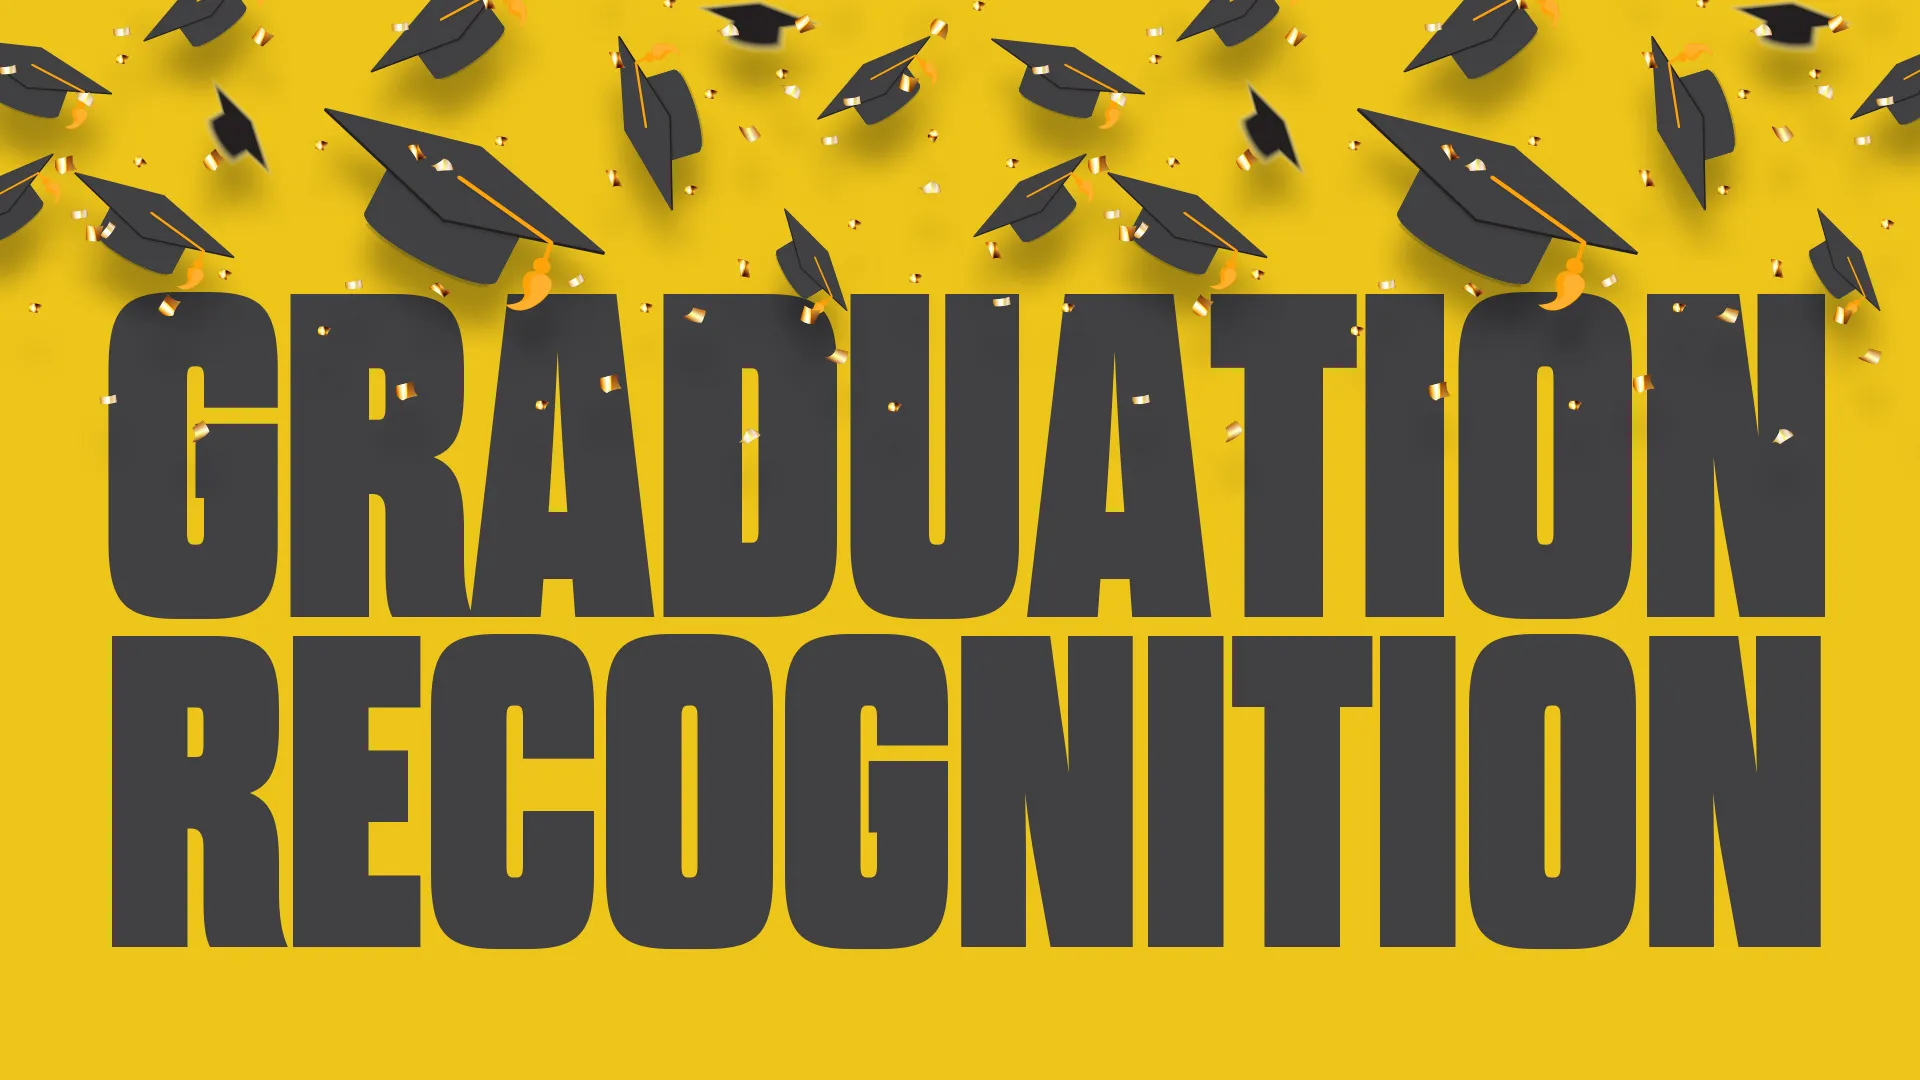 Honor the achievements of your graduates with this celebratory 'Graduation Recognition' graphic. Perfect for church media to showcase the milestones and success of its members.